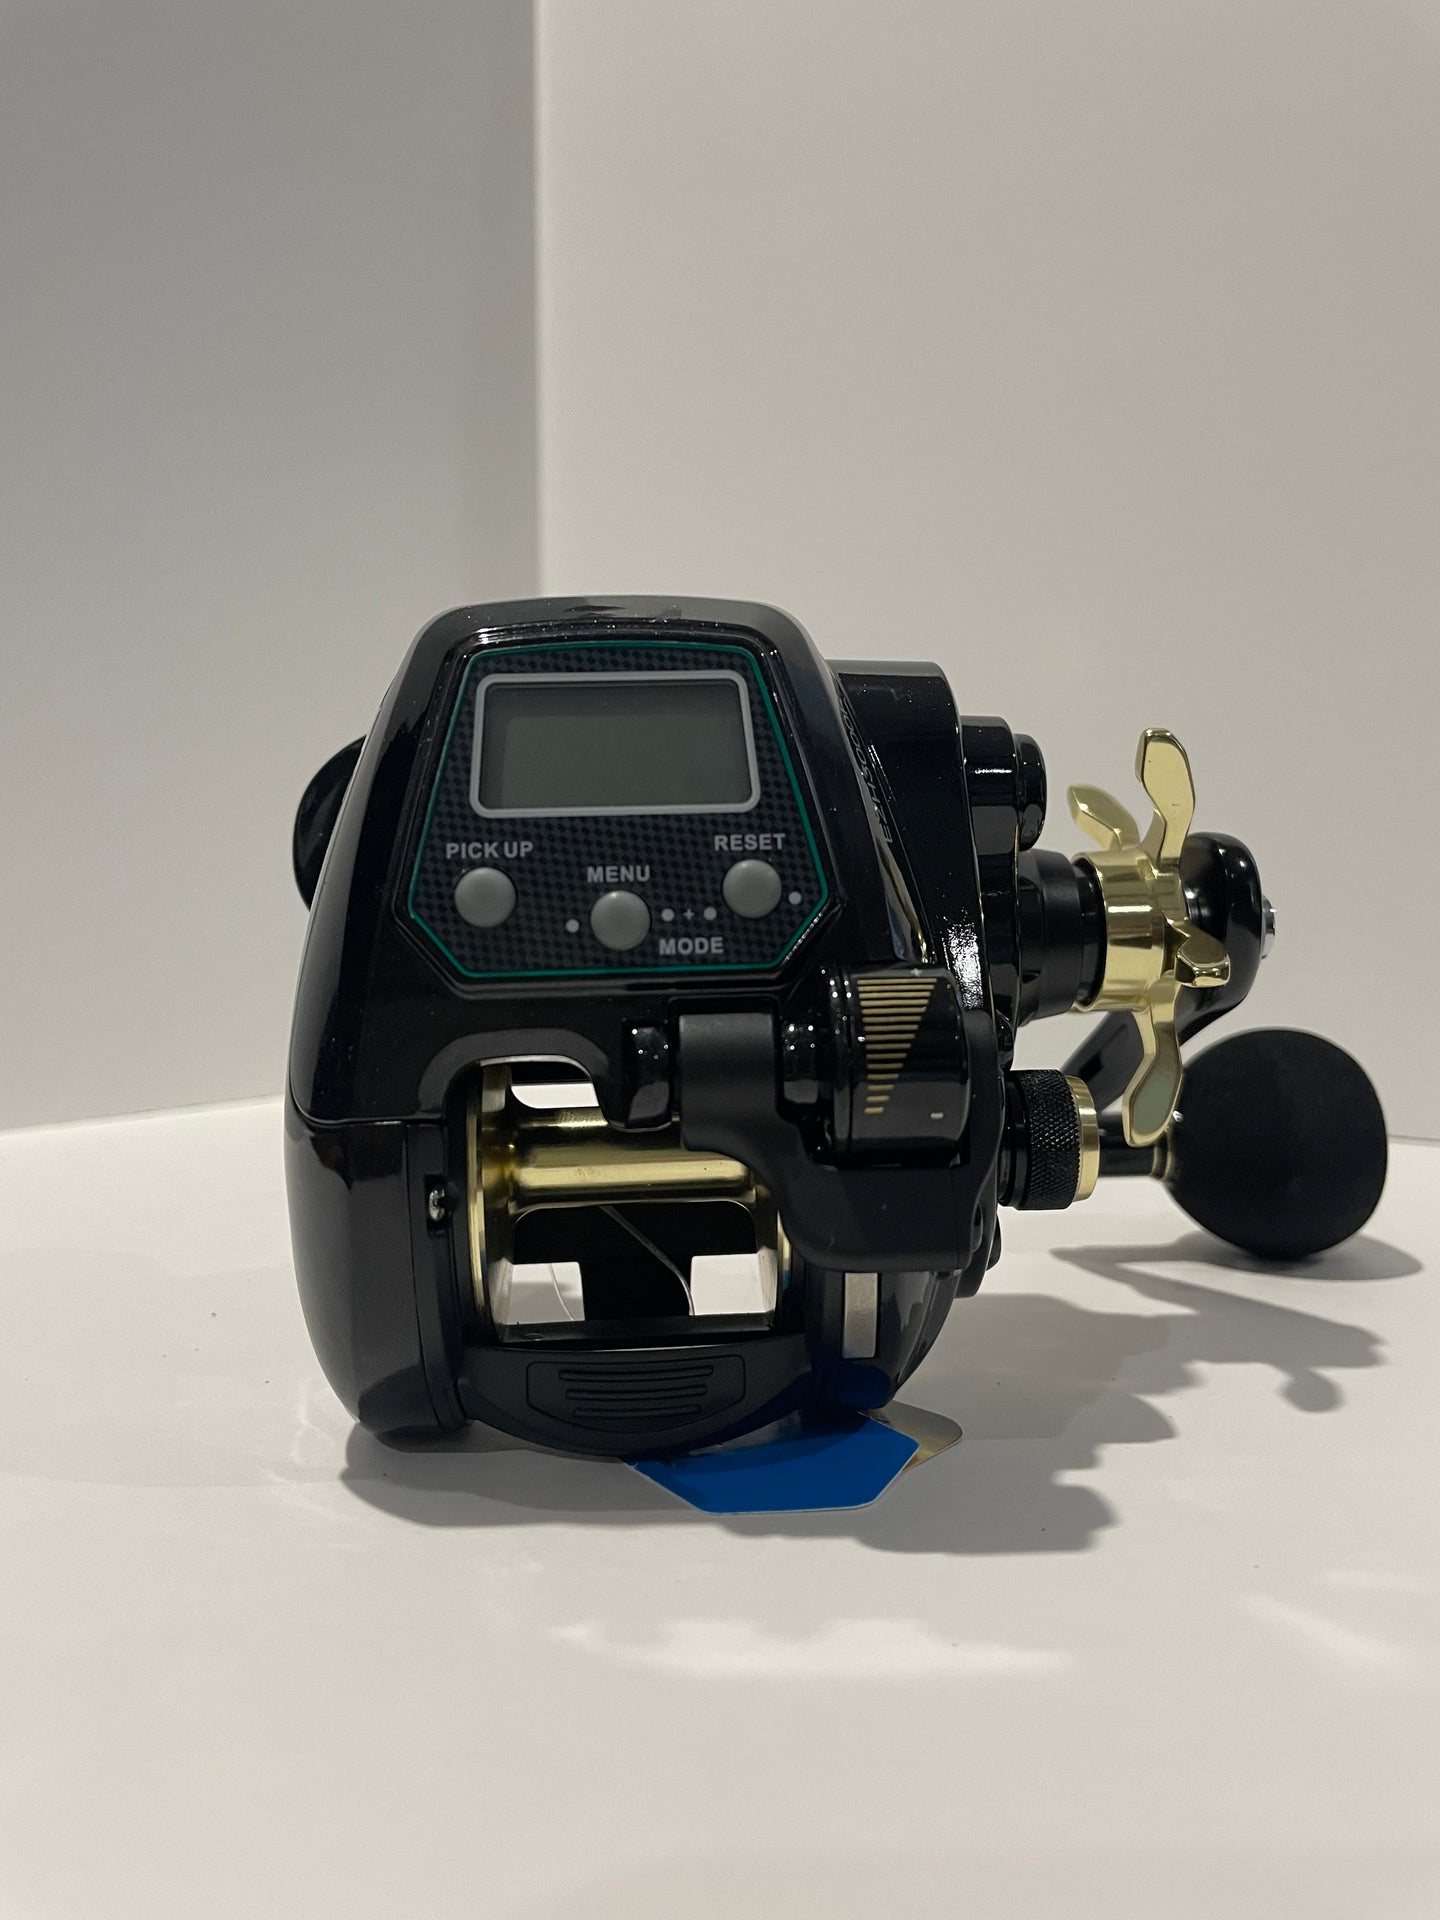 Ecooda 3000R Electric Jigging Reel with FREE Reel Battery RB300 Starter Kit Included!